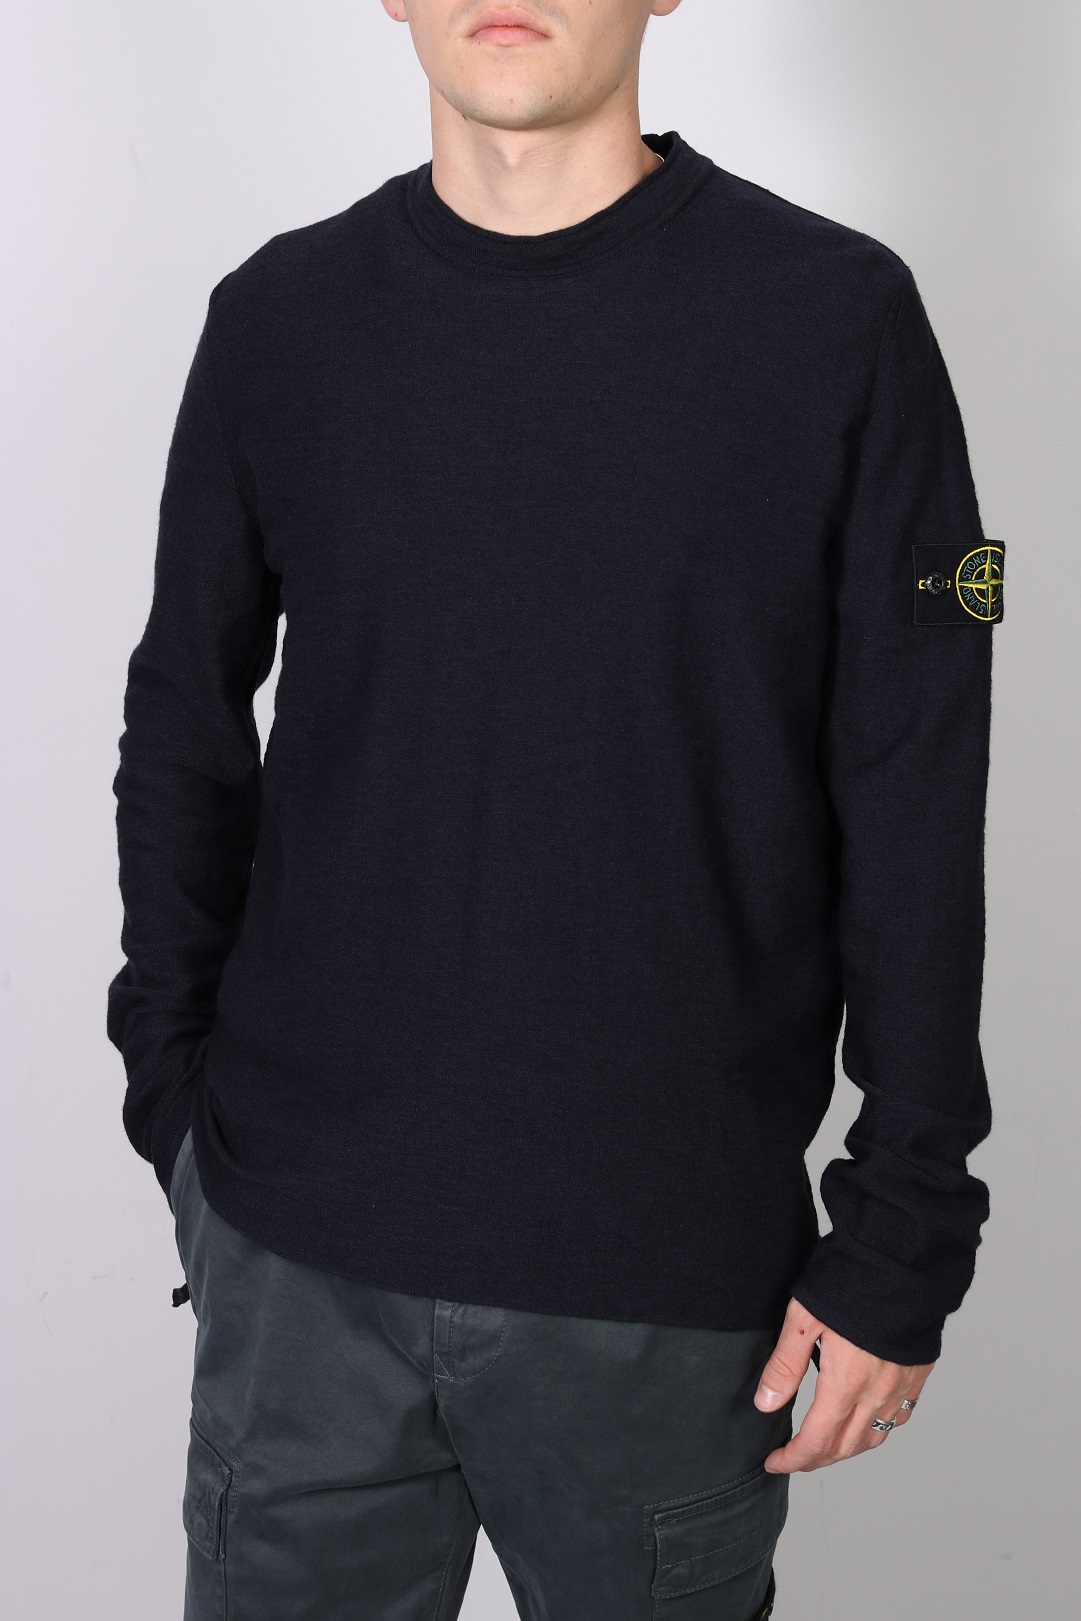 STONE ISLAND Knit Pullover in Navy Blue 3XL